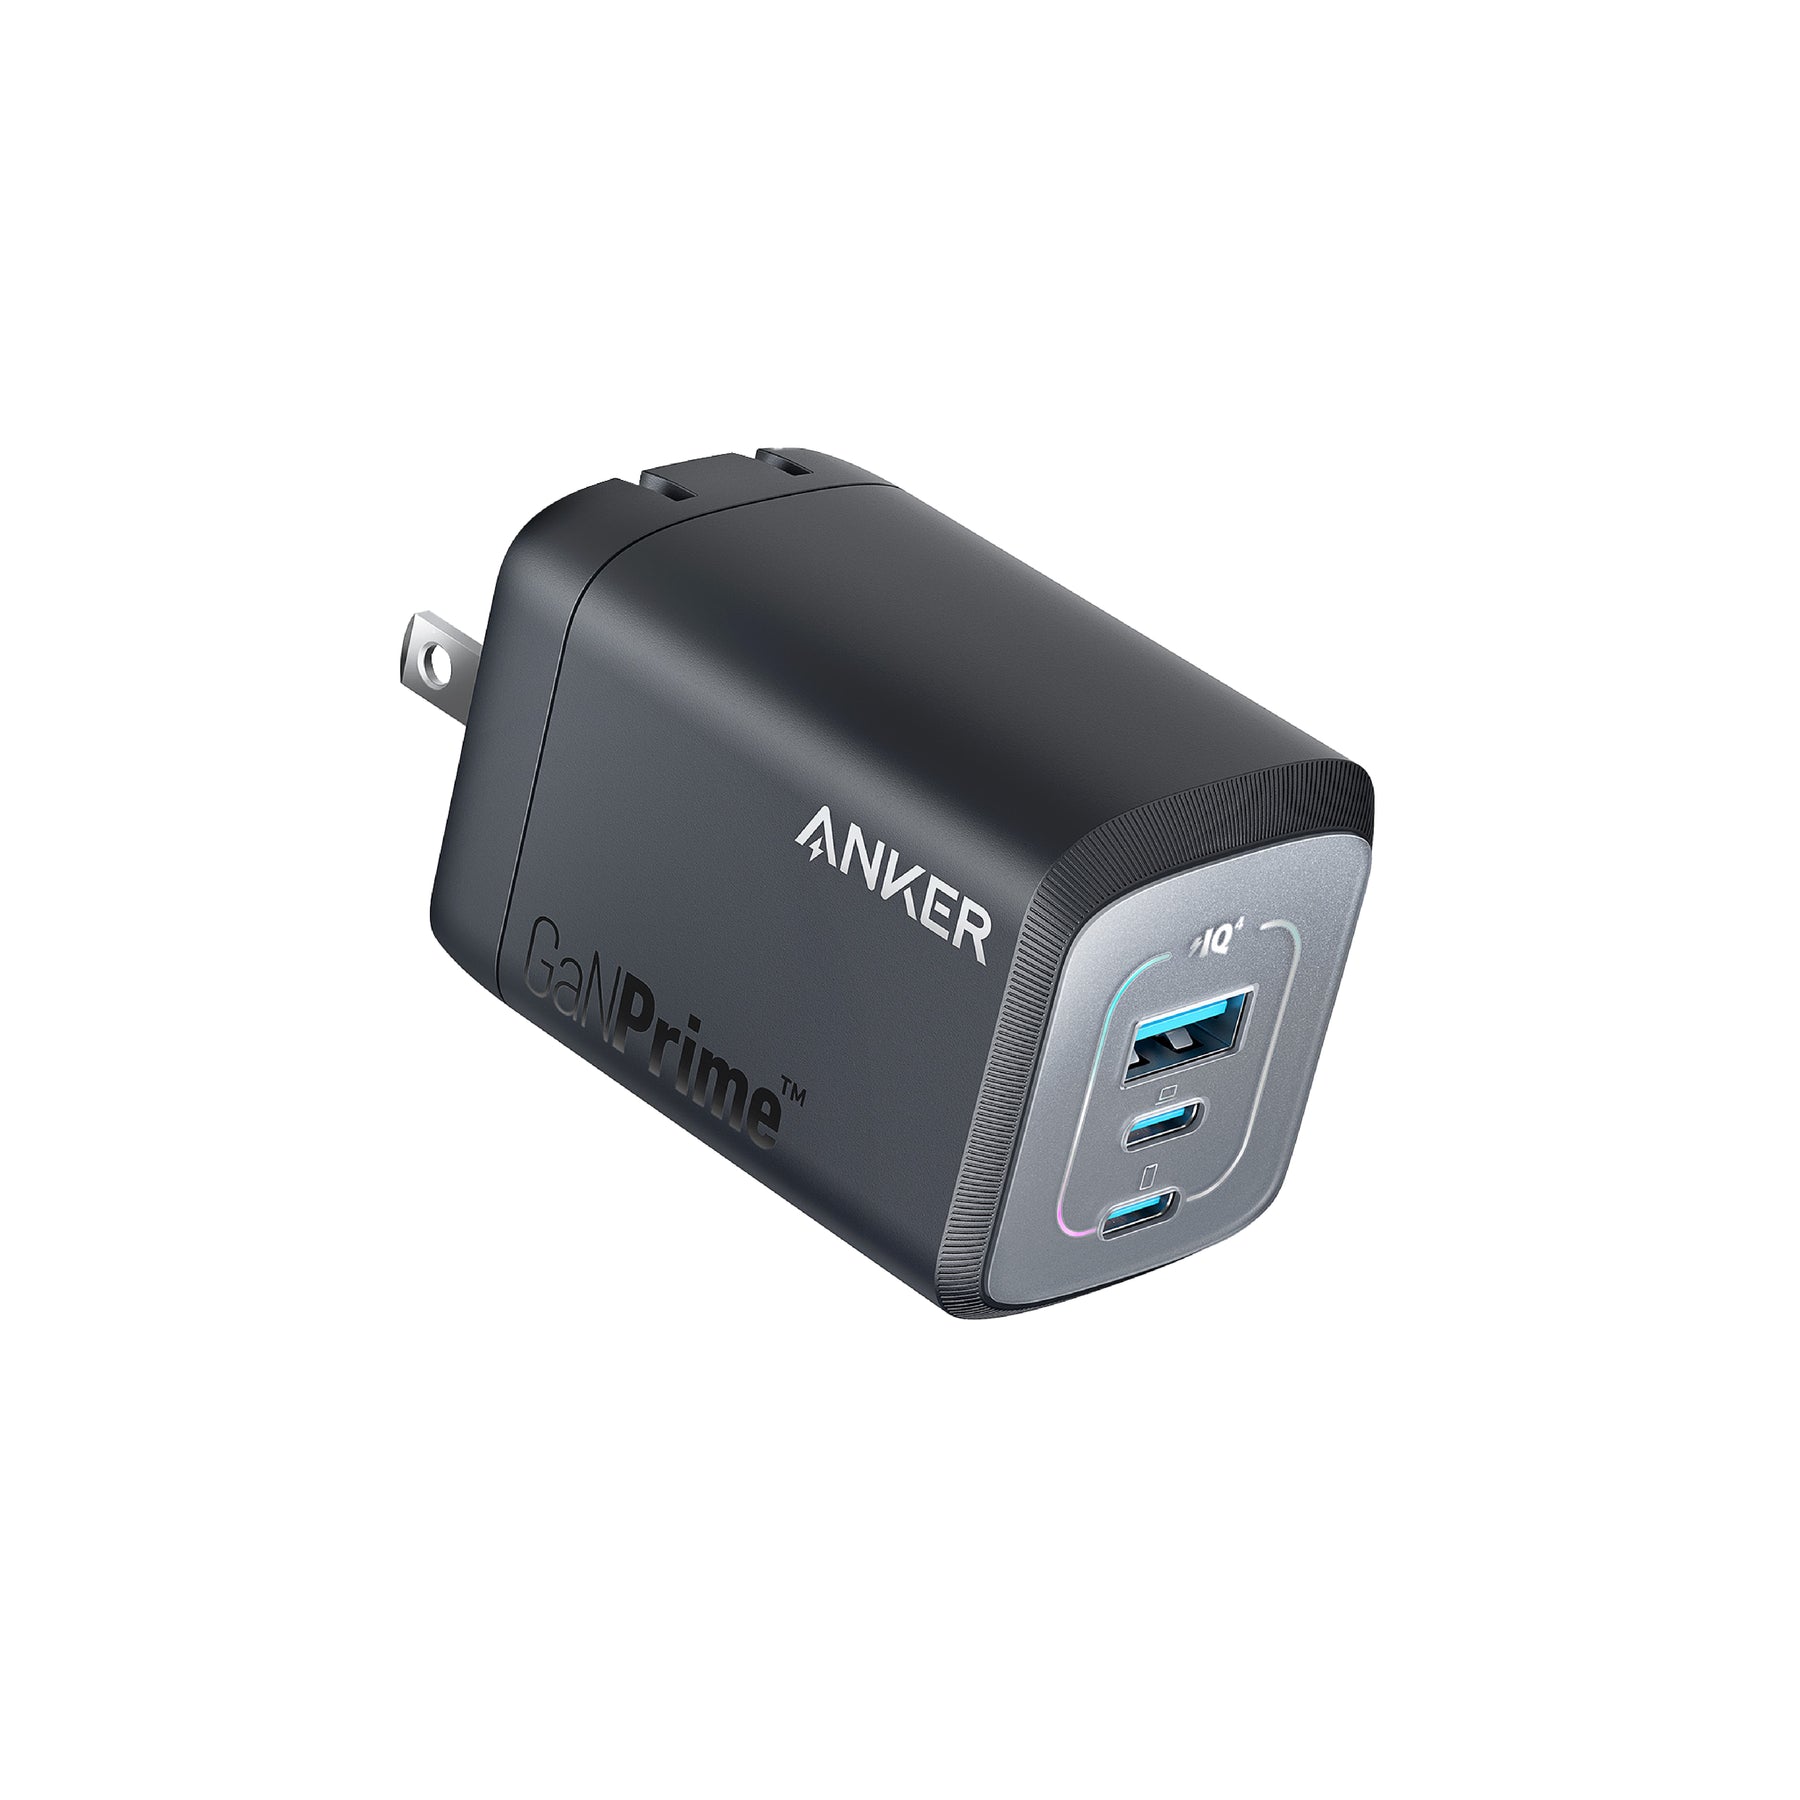 Anker Prime GaN Wall Charger (100W, 3 Ports)